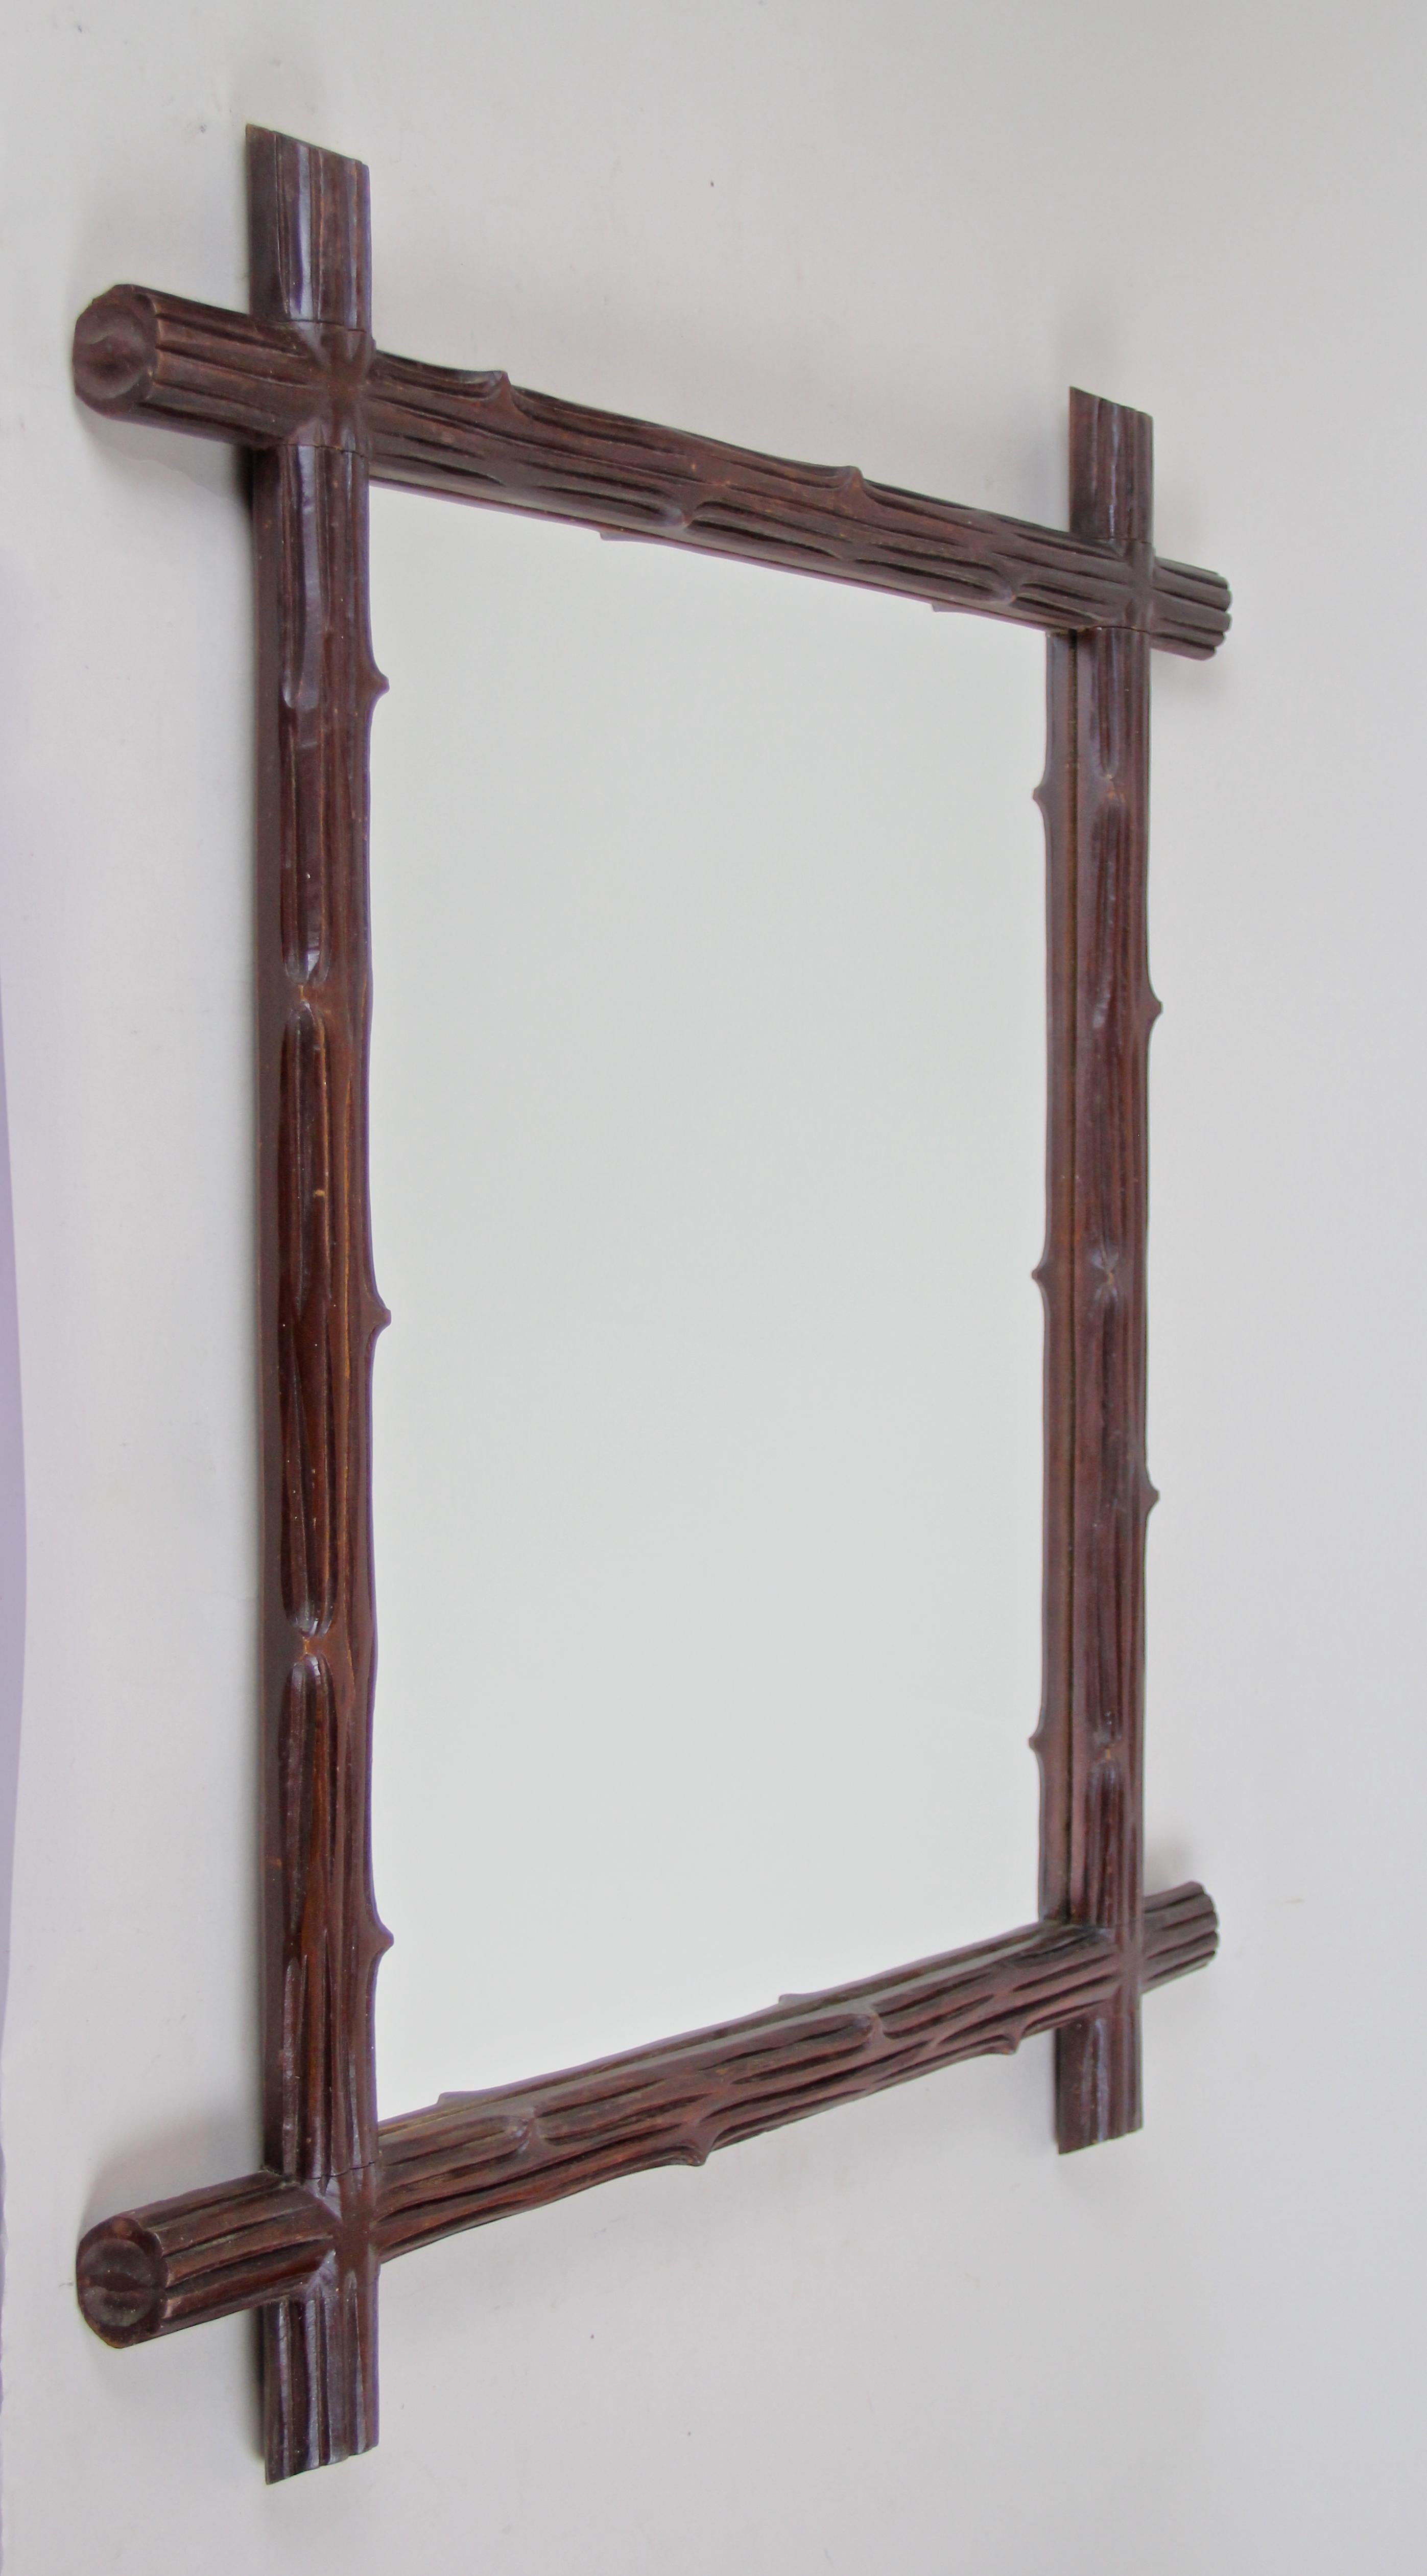 From circa 1900, the turn of the century in Austria comes this beautiful wooden Black Forest wall mirror. A simple but elegant design was created out of hand carved basswood, showing the typical 